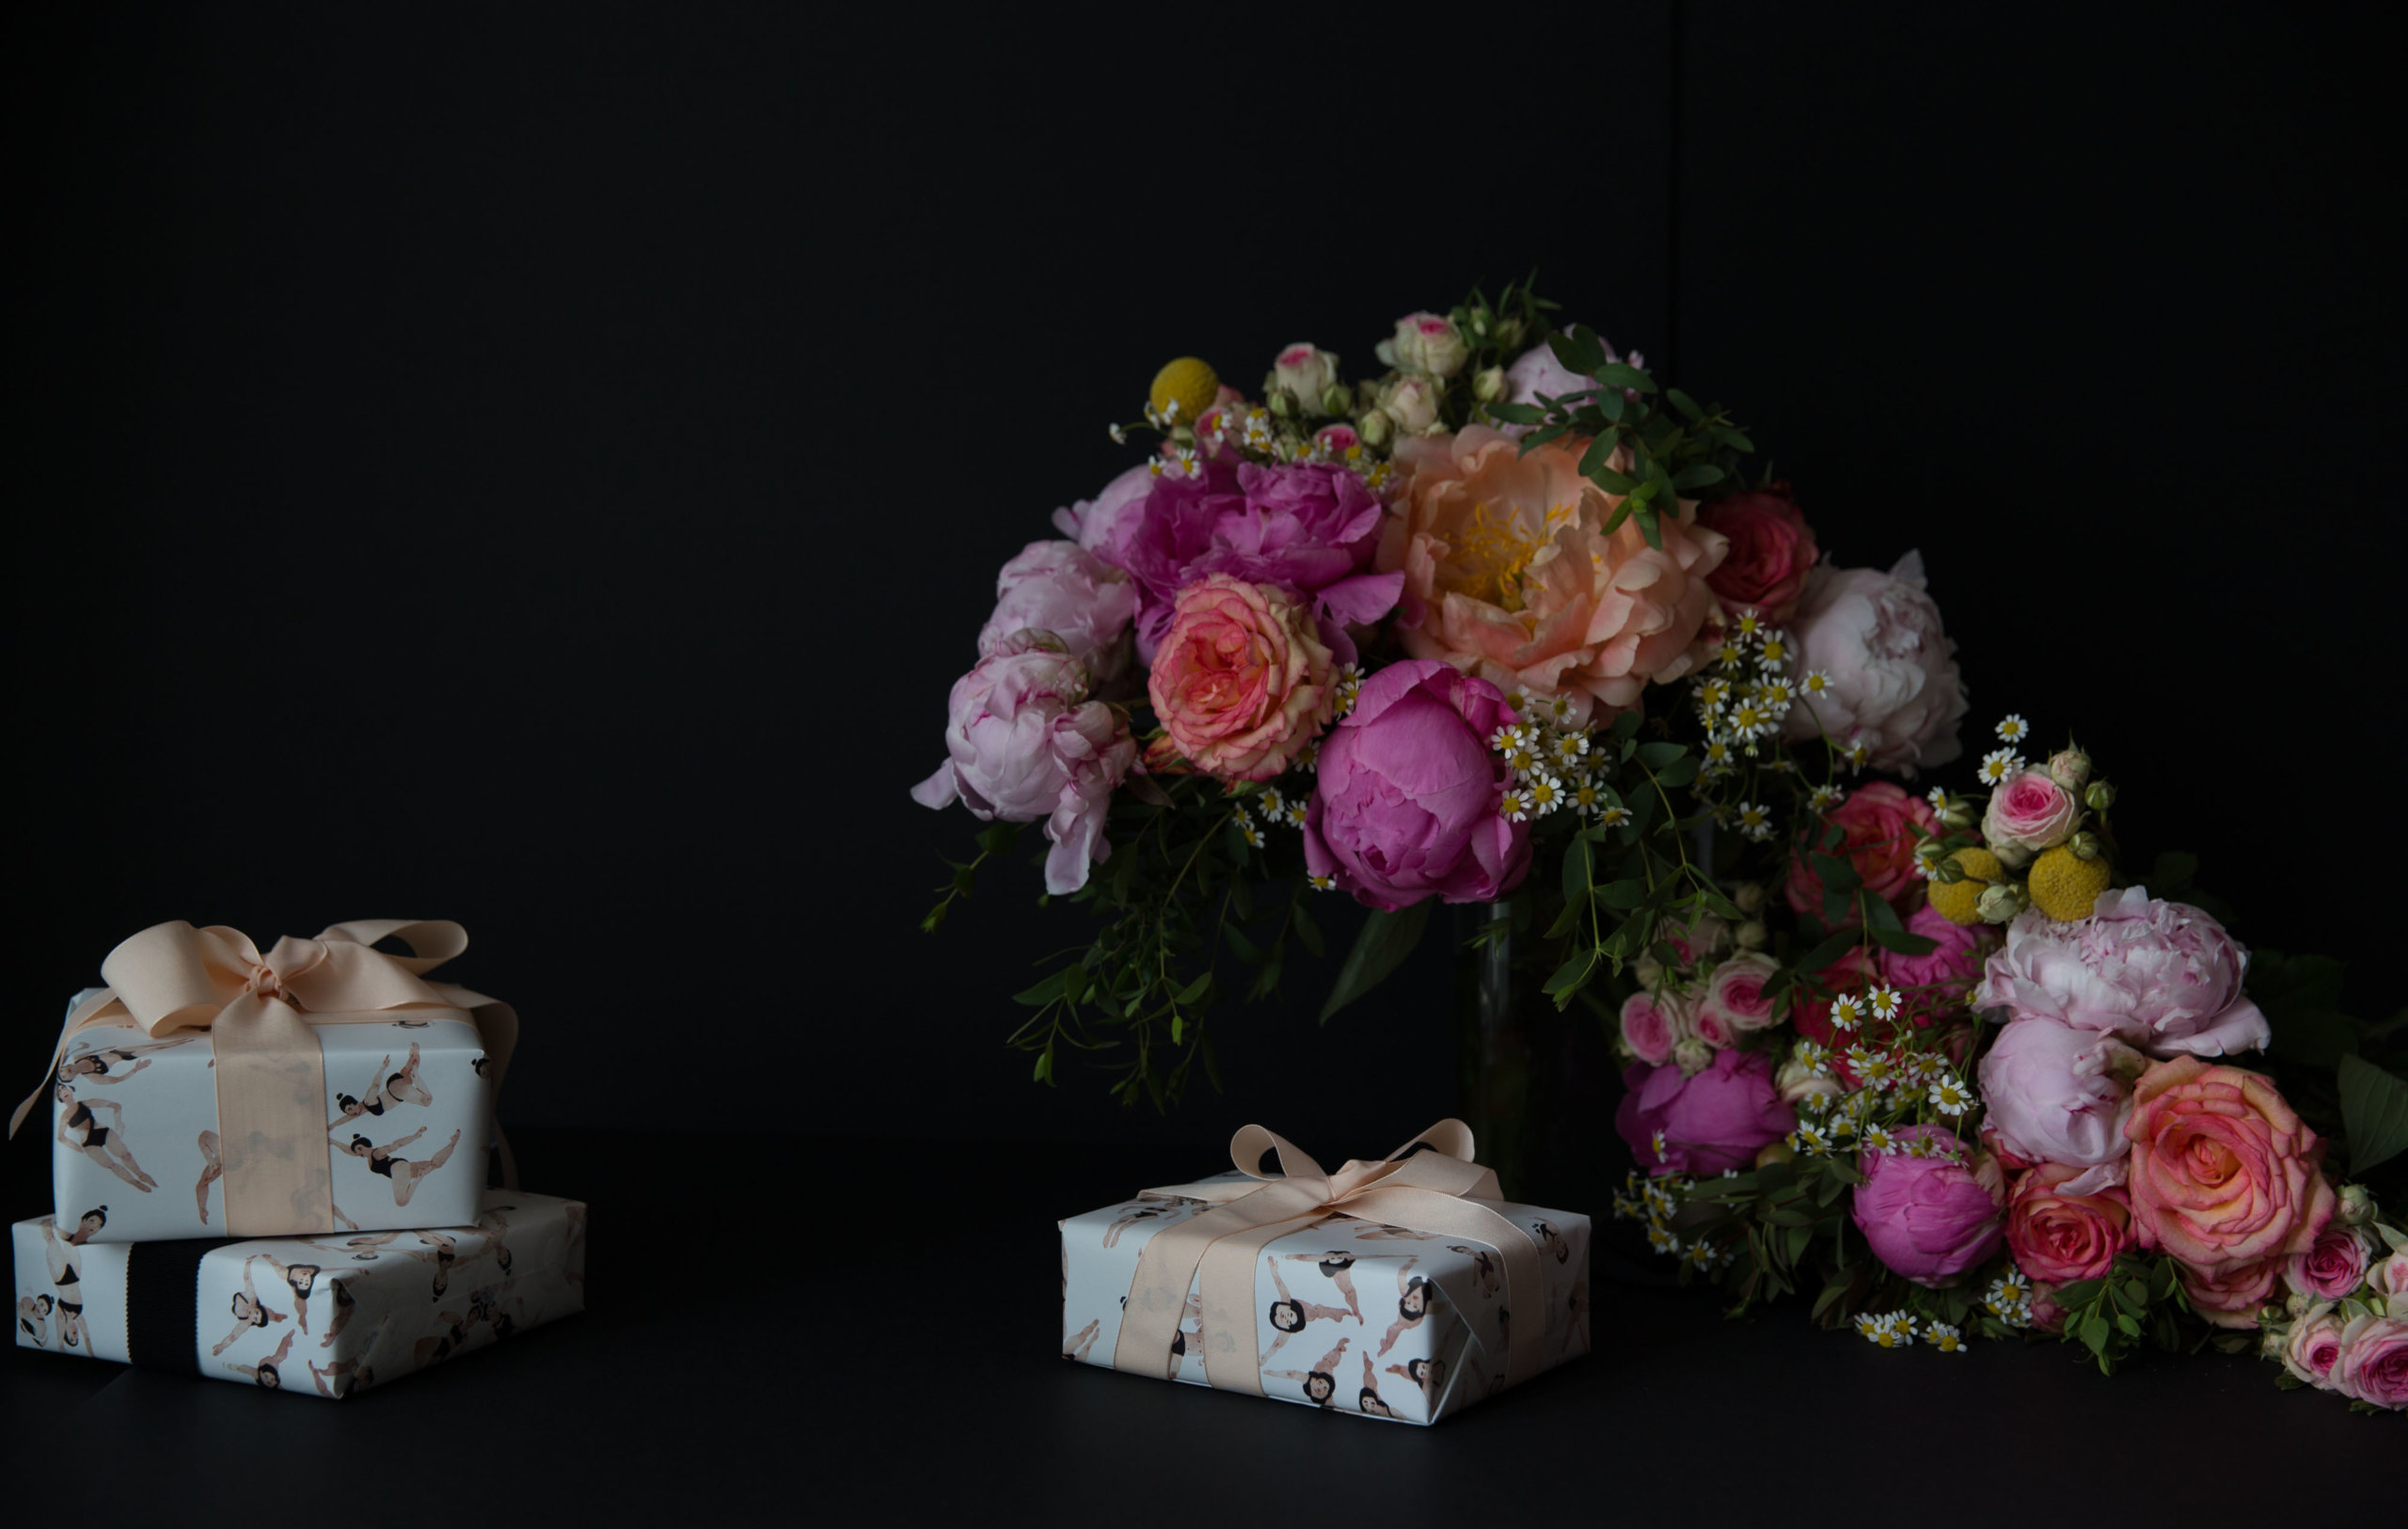 Impression Originale gifts and sublime flowers bouquet on black background